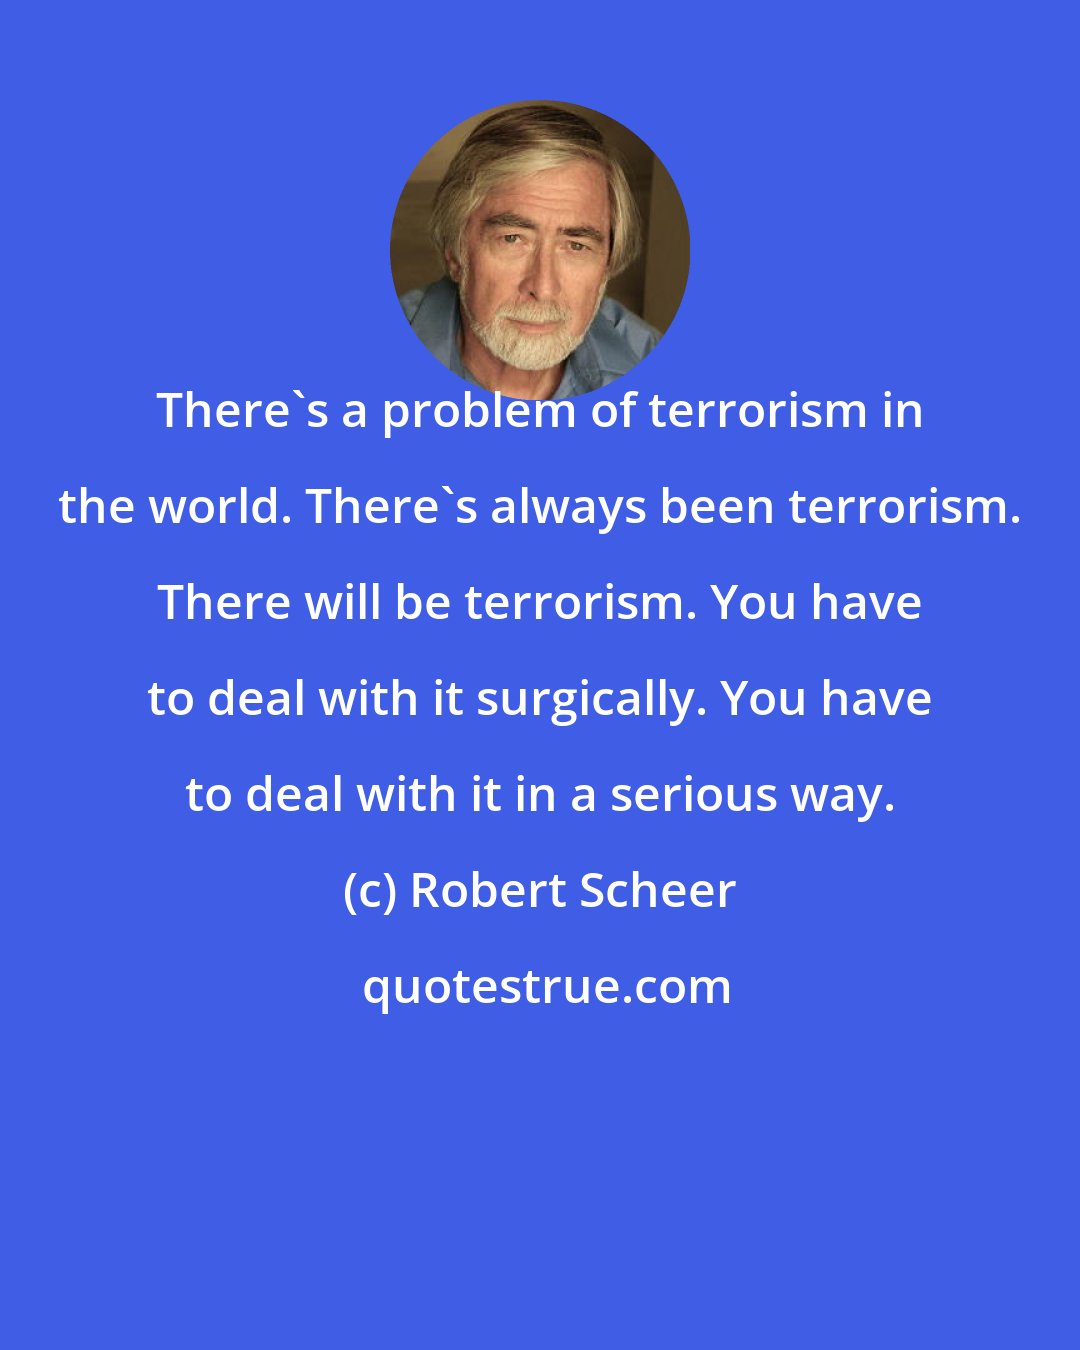 Robert Scheer: There's a problem of terrorism in the world. There's always been terrorism. There will be terrorism. You have to deal with it surgically. You have to deal with it in a serious way.